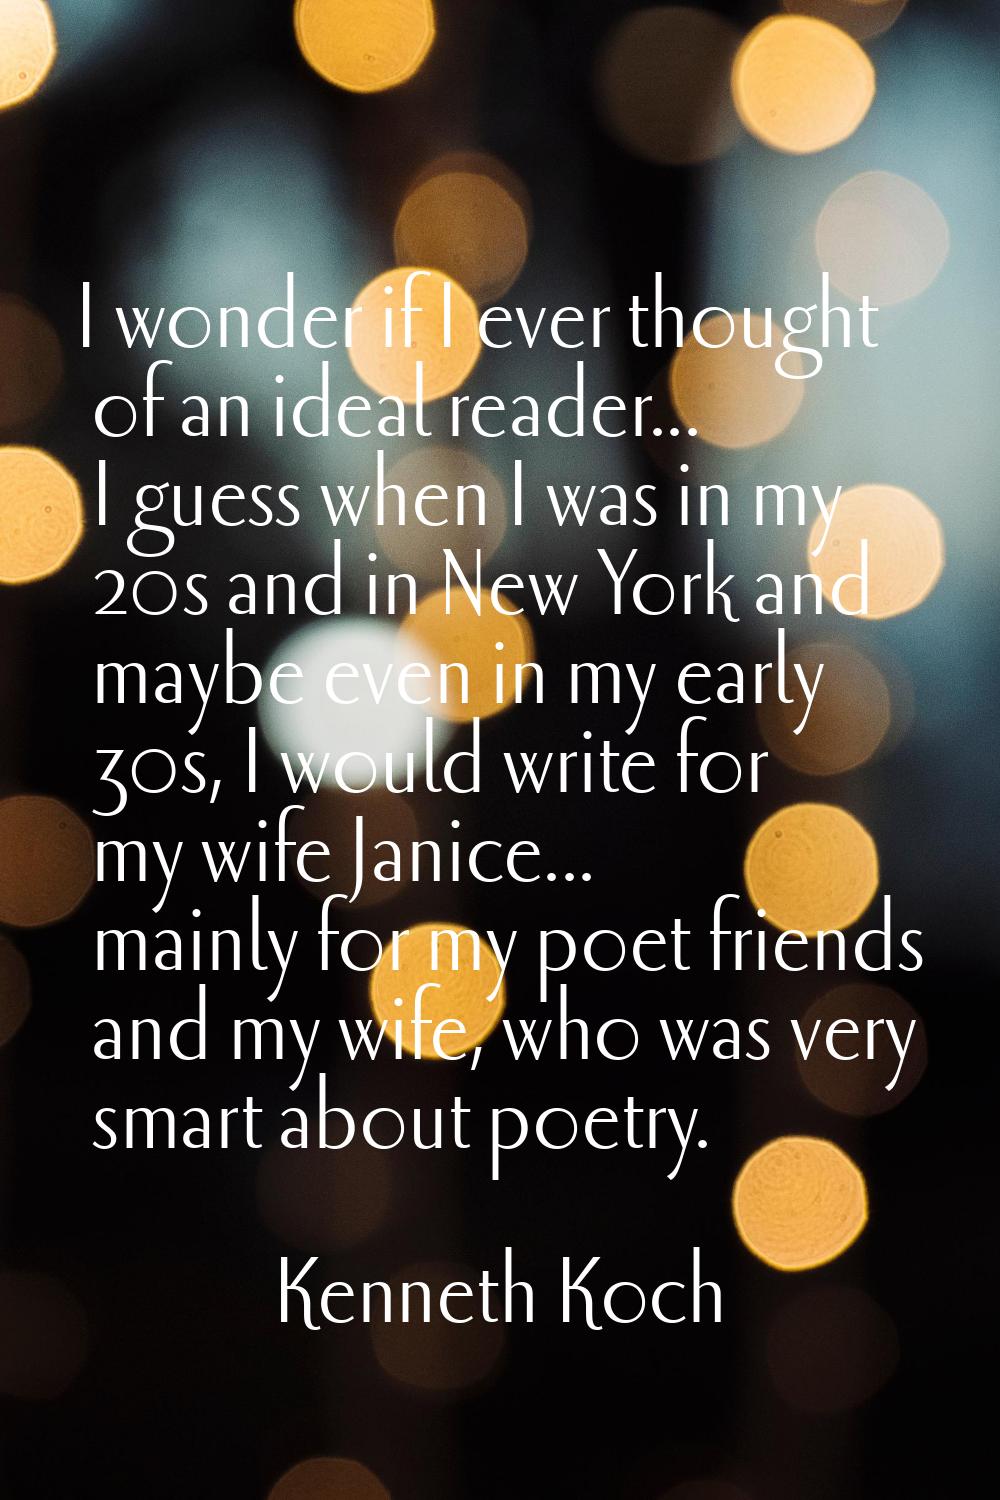 I wonder if I ever thought of an ideal reader... I guess when I was in my 20s and in New York and m